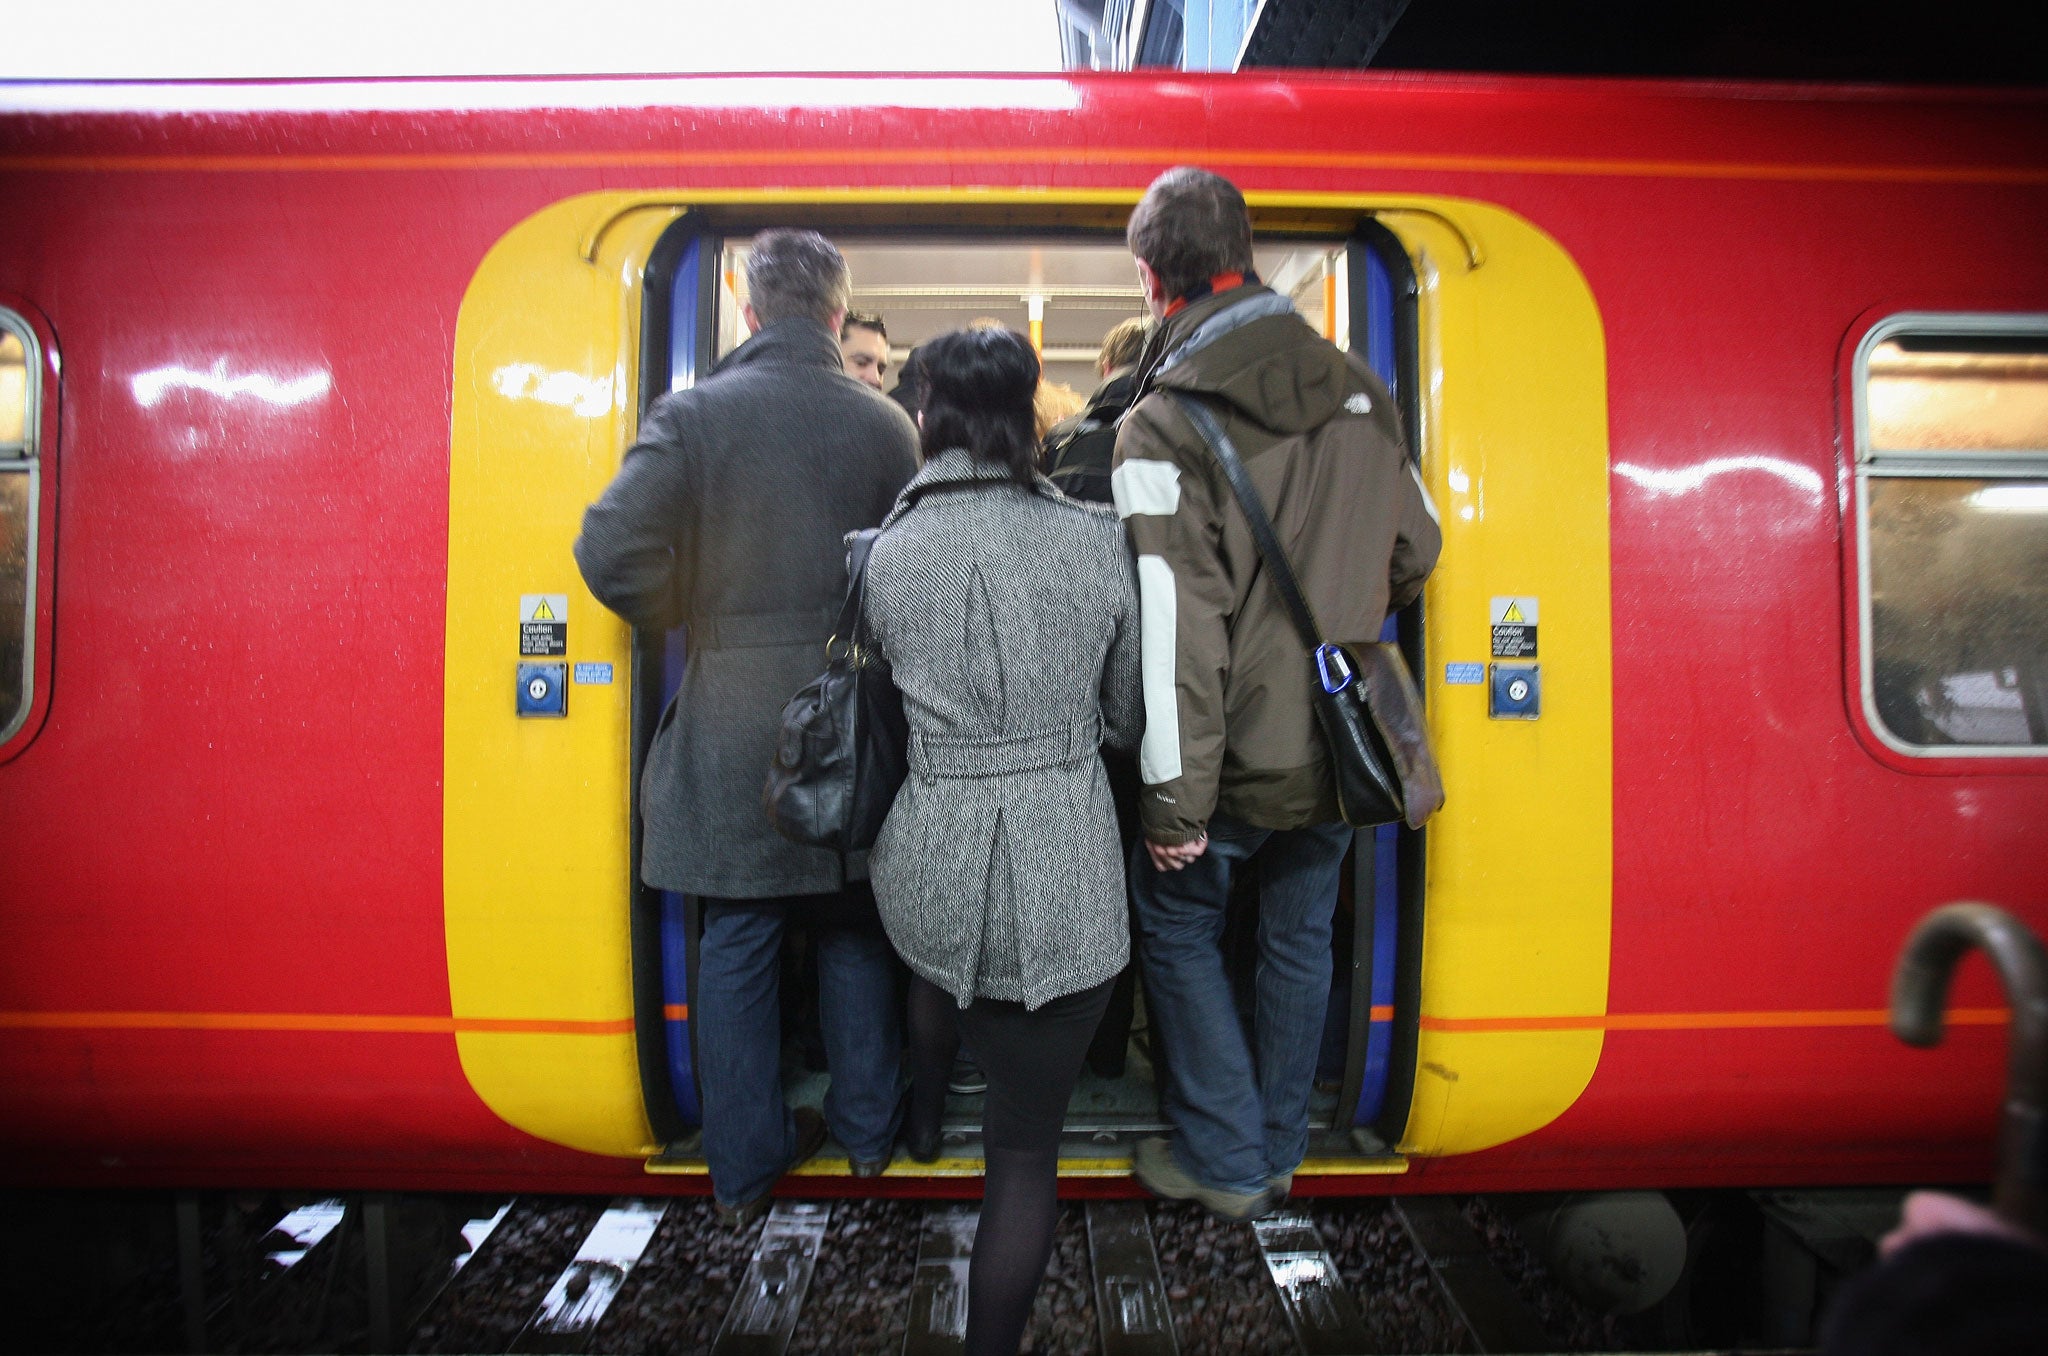 Commuters squeeze on to a train to Victoria Station at Clapham Junction on February 5, 2009 in London, England.